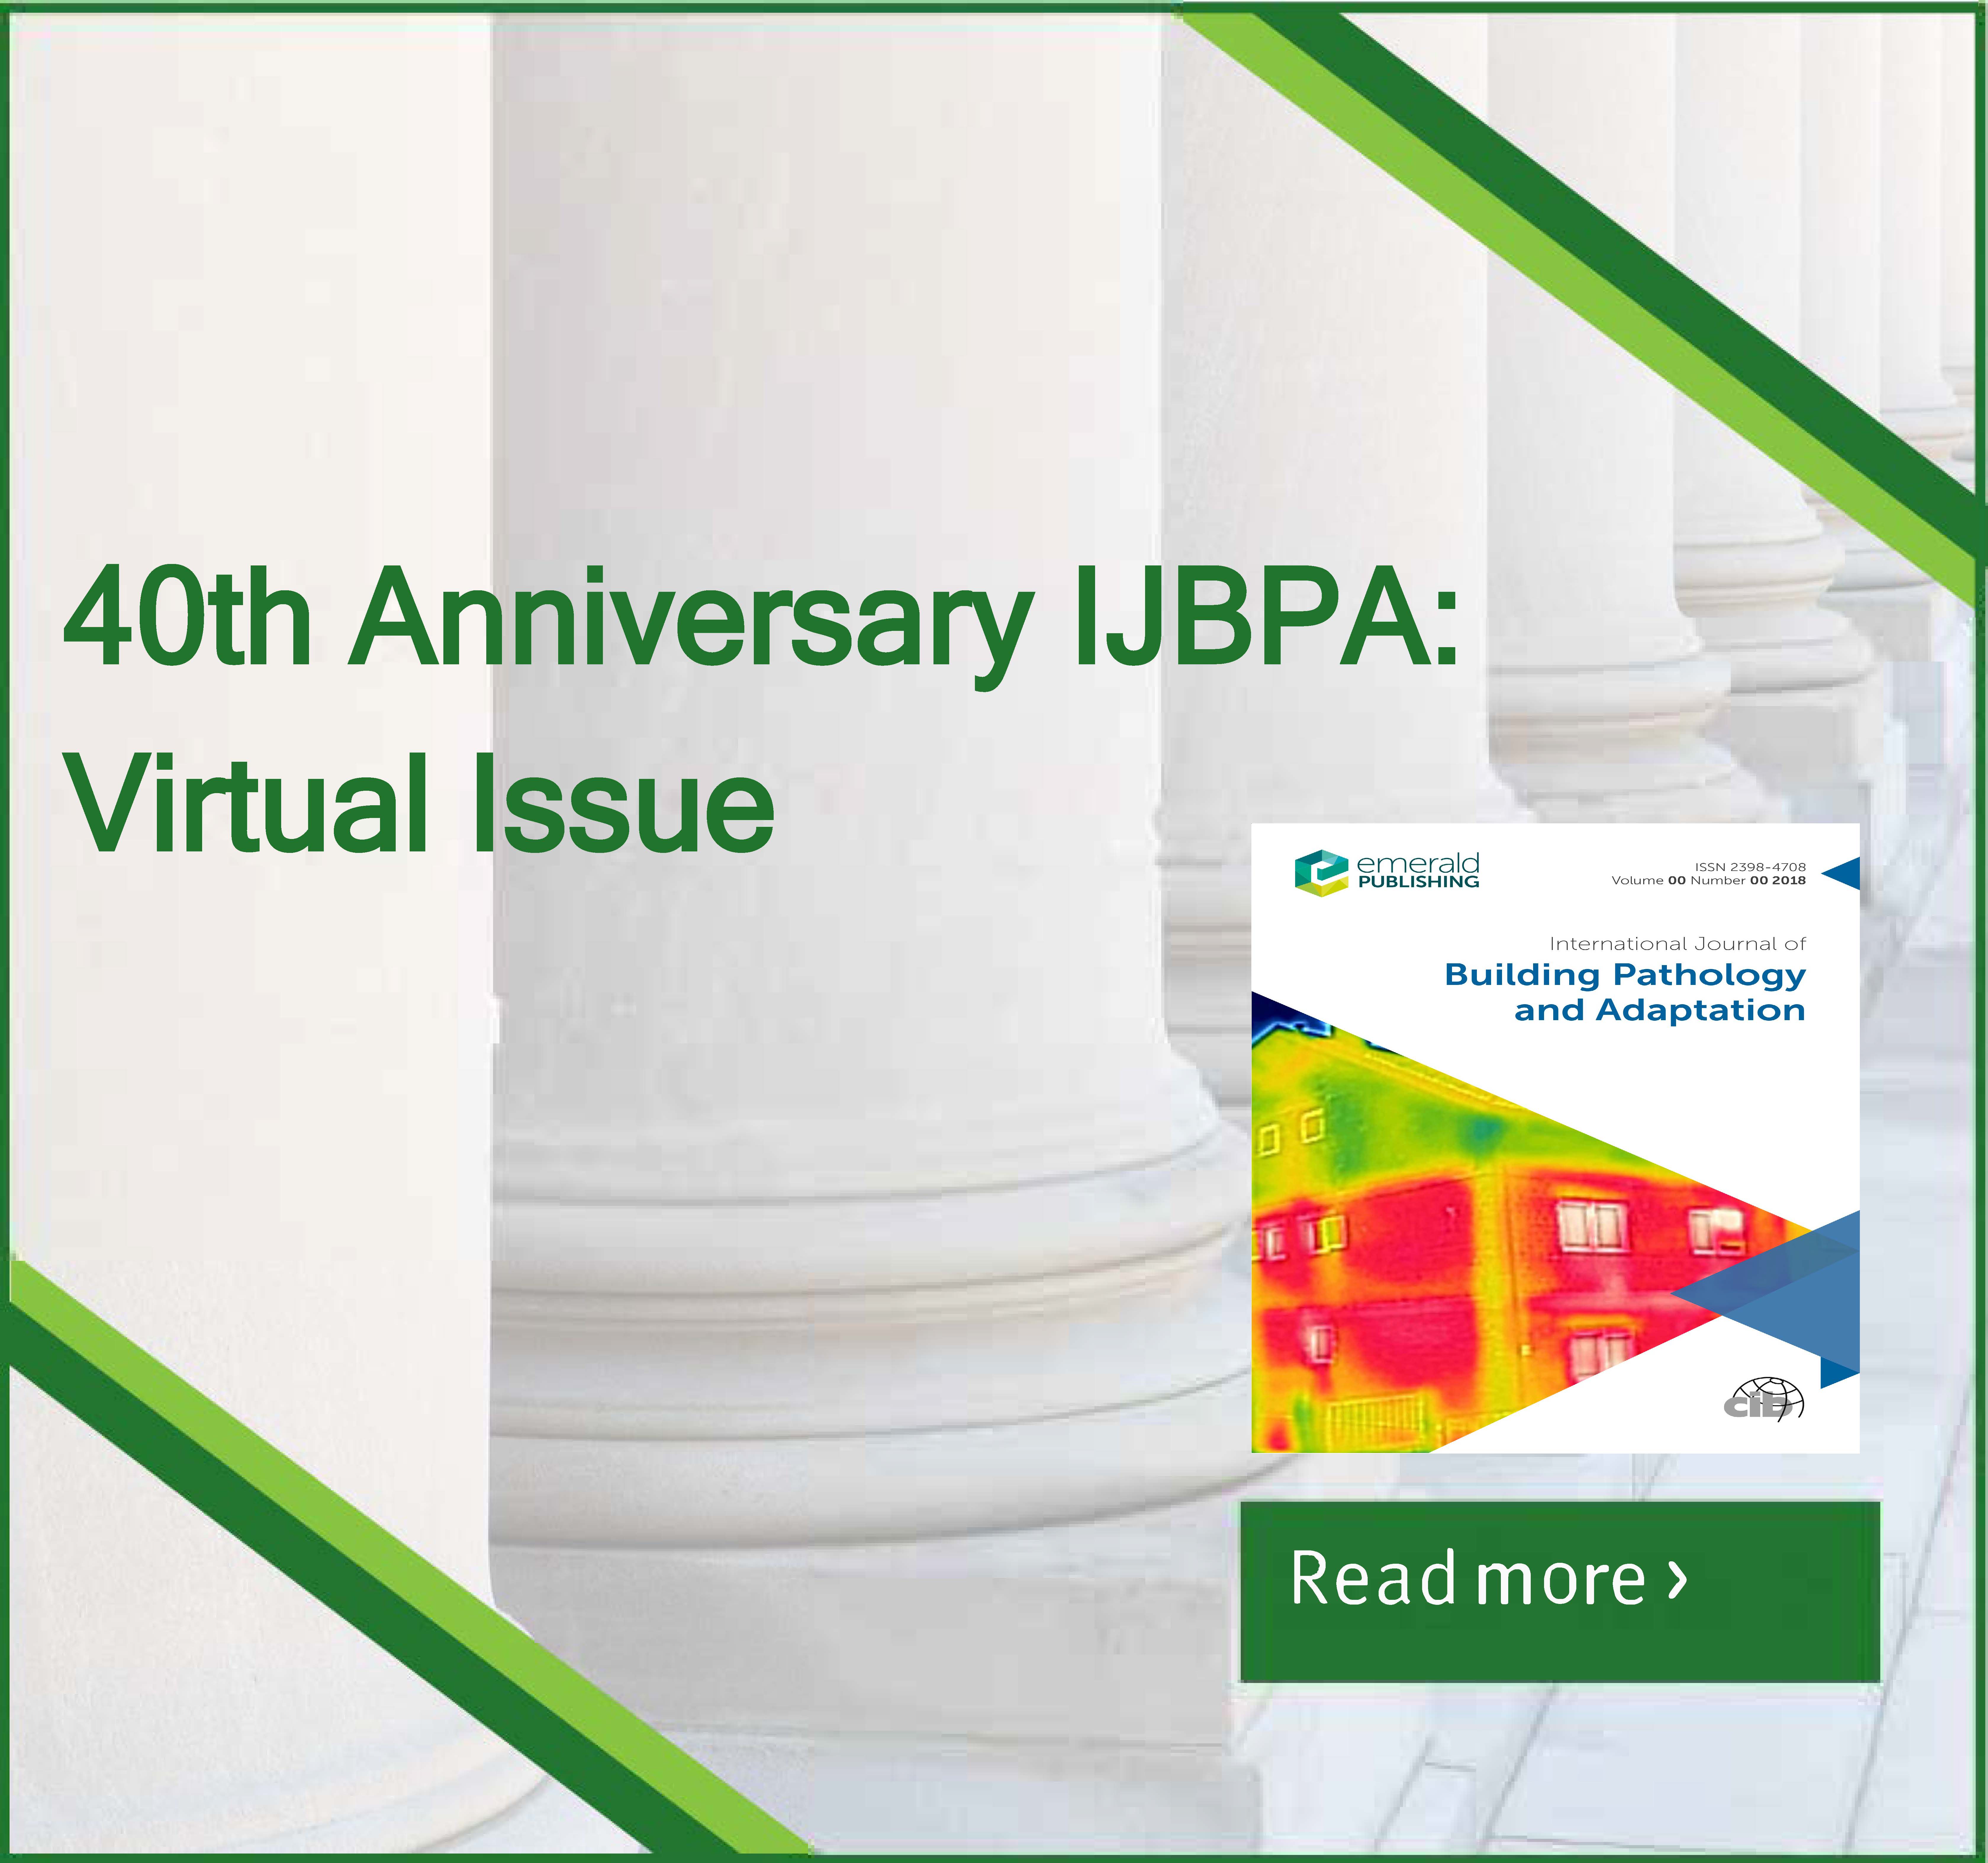 Celebrating the 40th Anniversary of IJBPA: a Virtual Issue